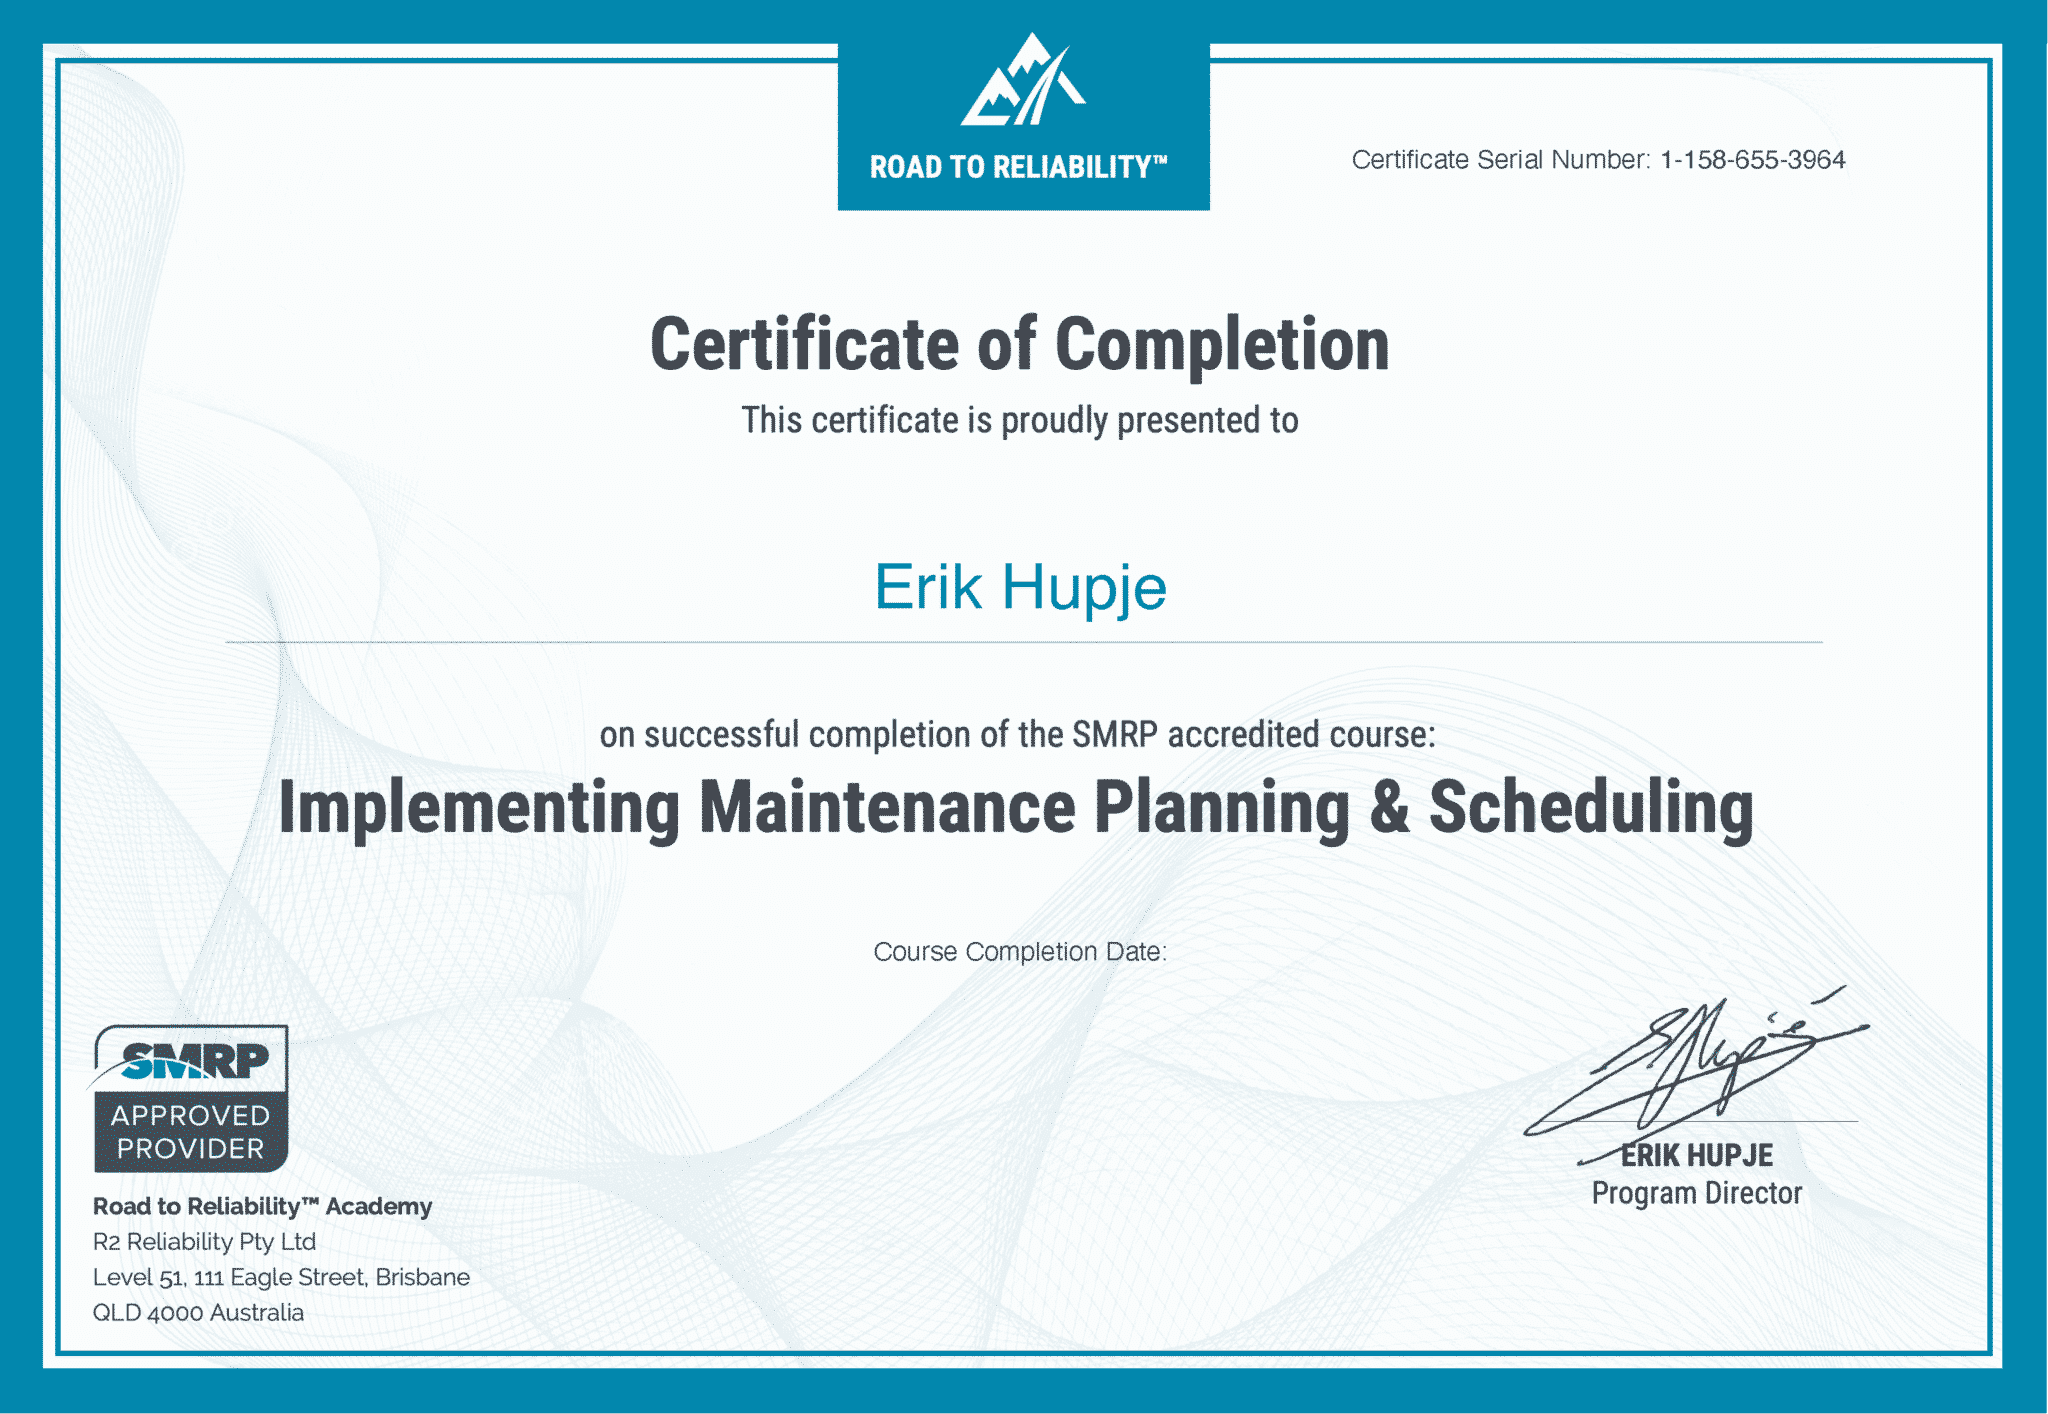 Certificate of Completion for the online course: Implementing Maintenance Planning & Scheduling